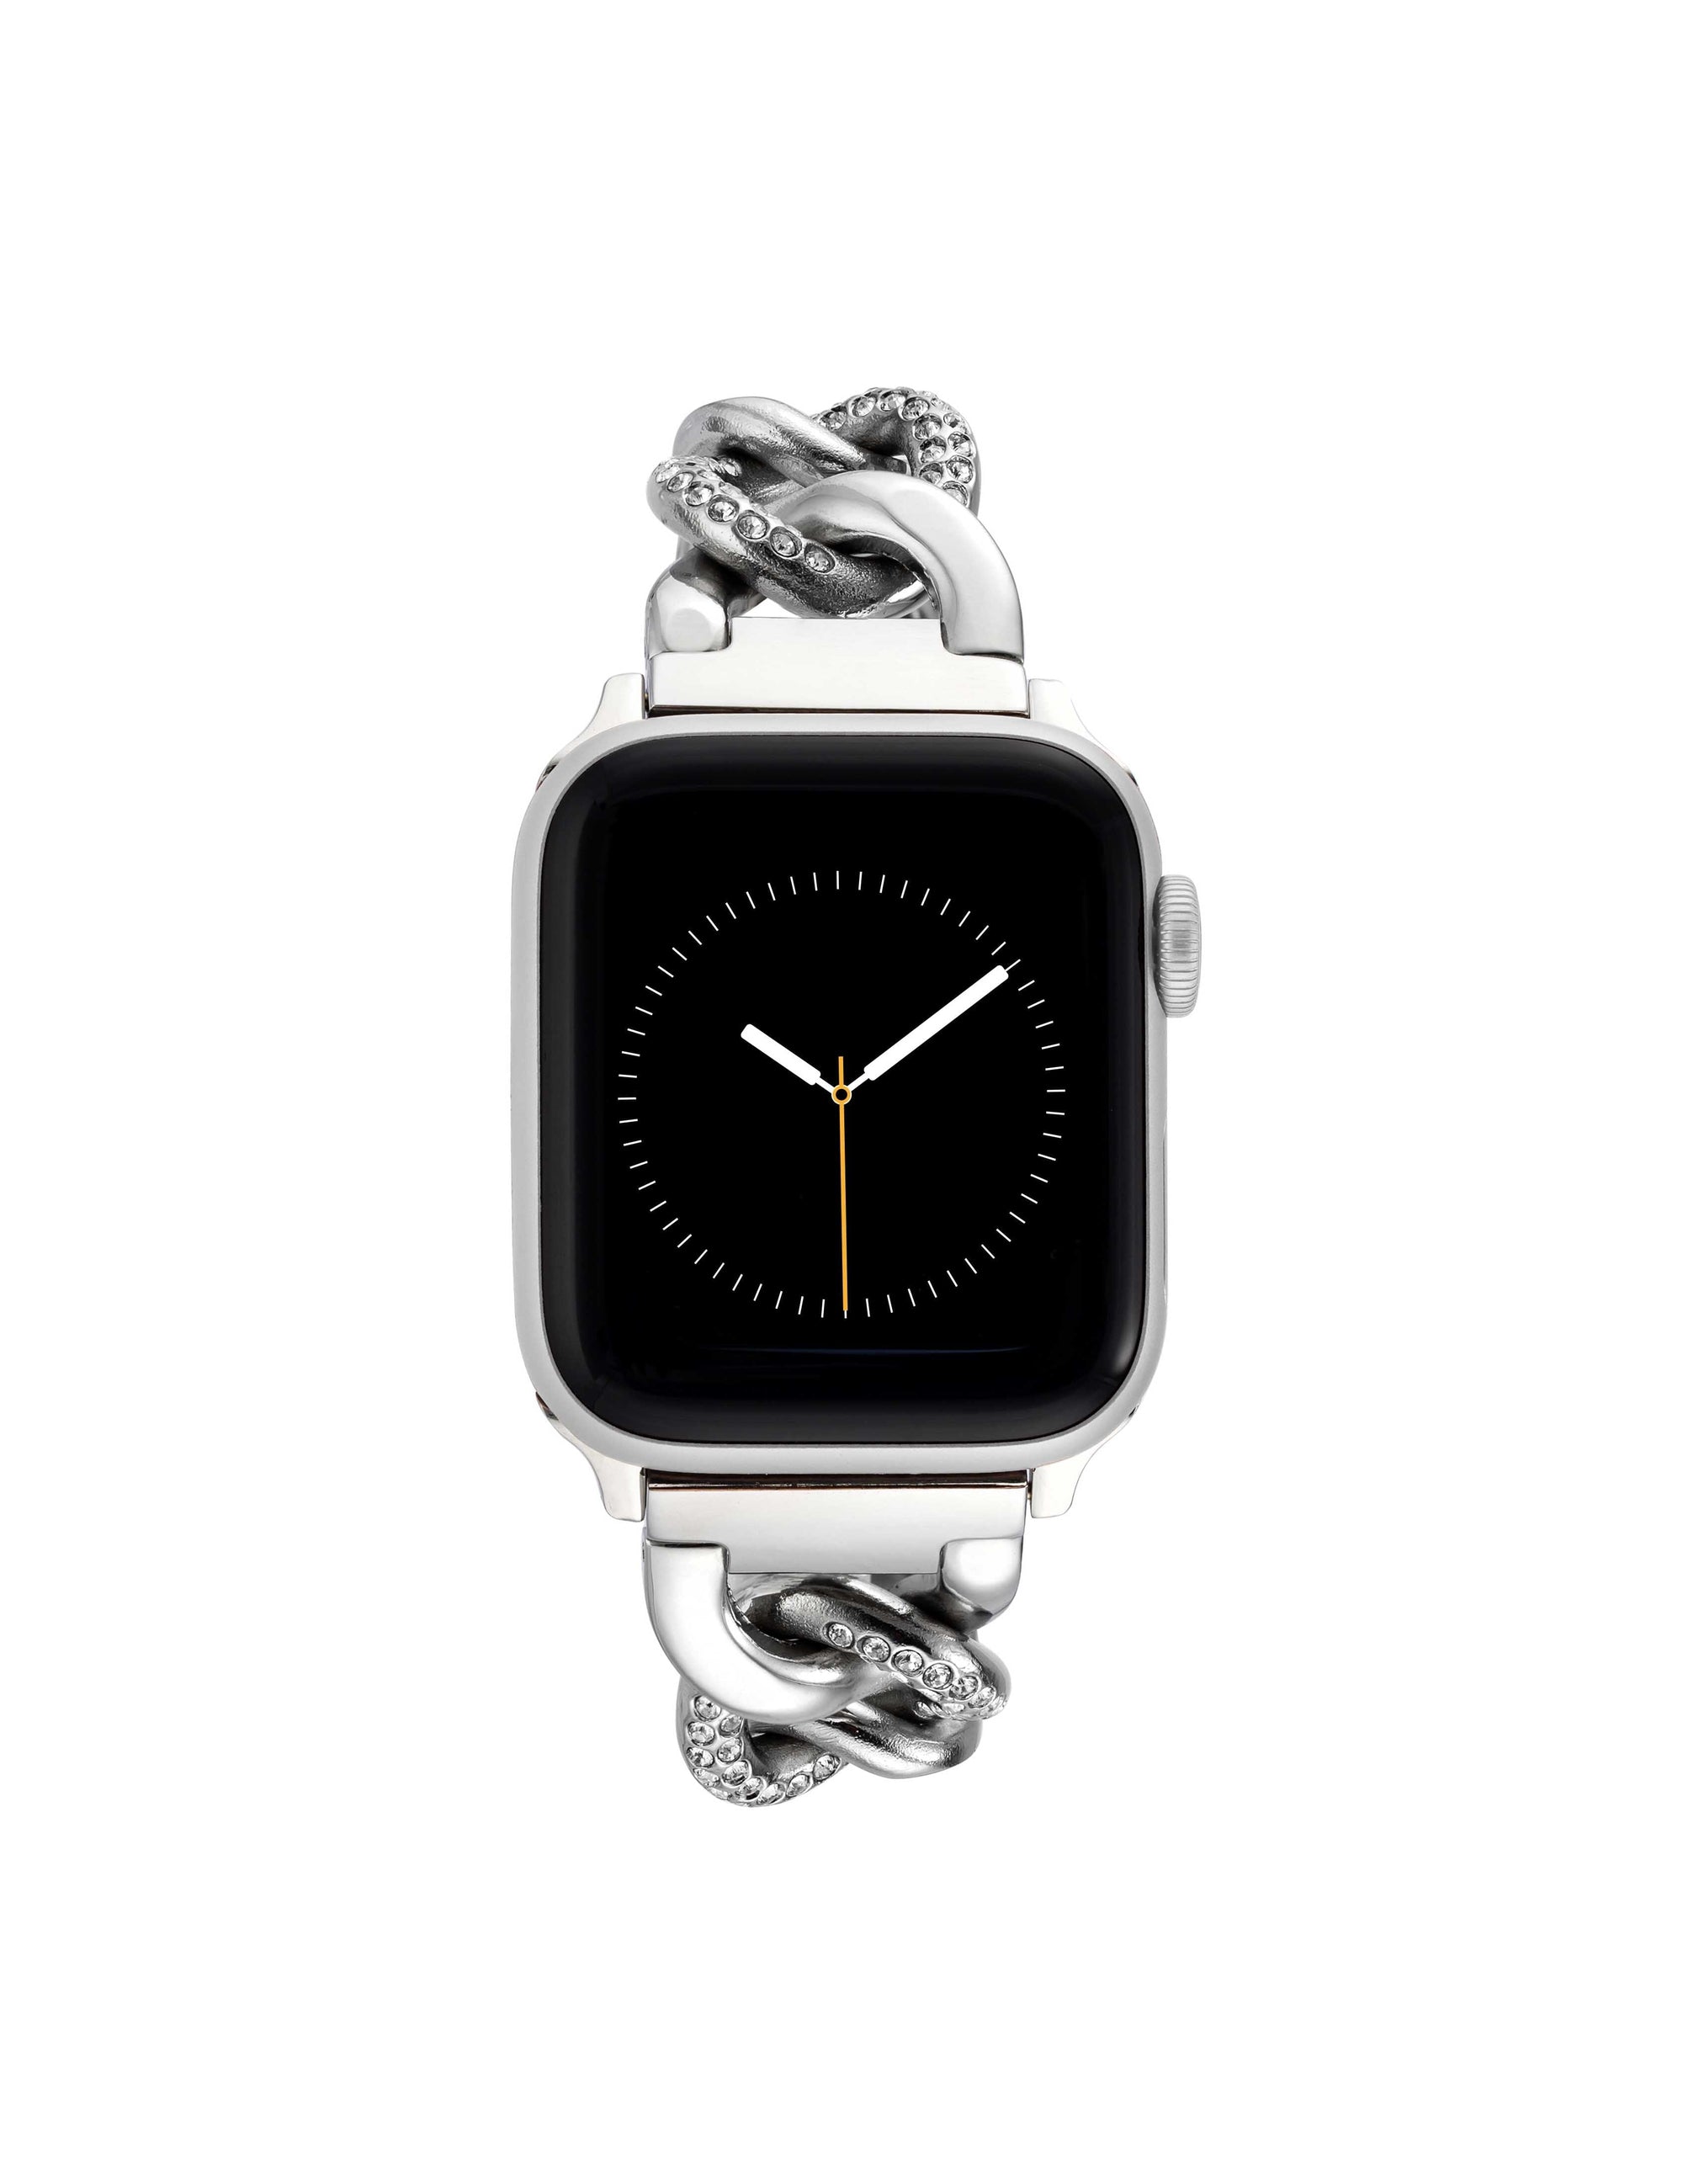 Shop Silver Watch Bands for the Apple Watch